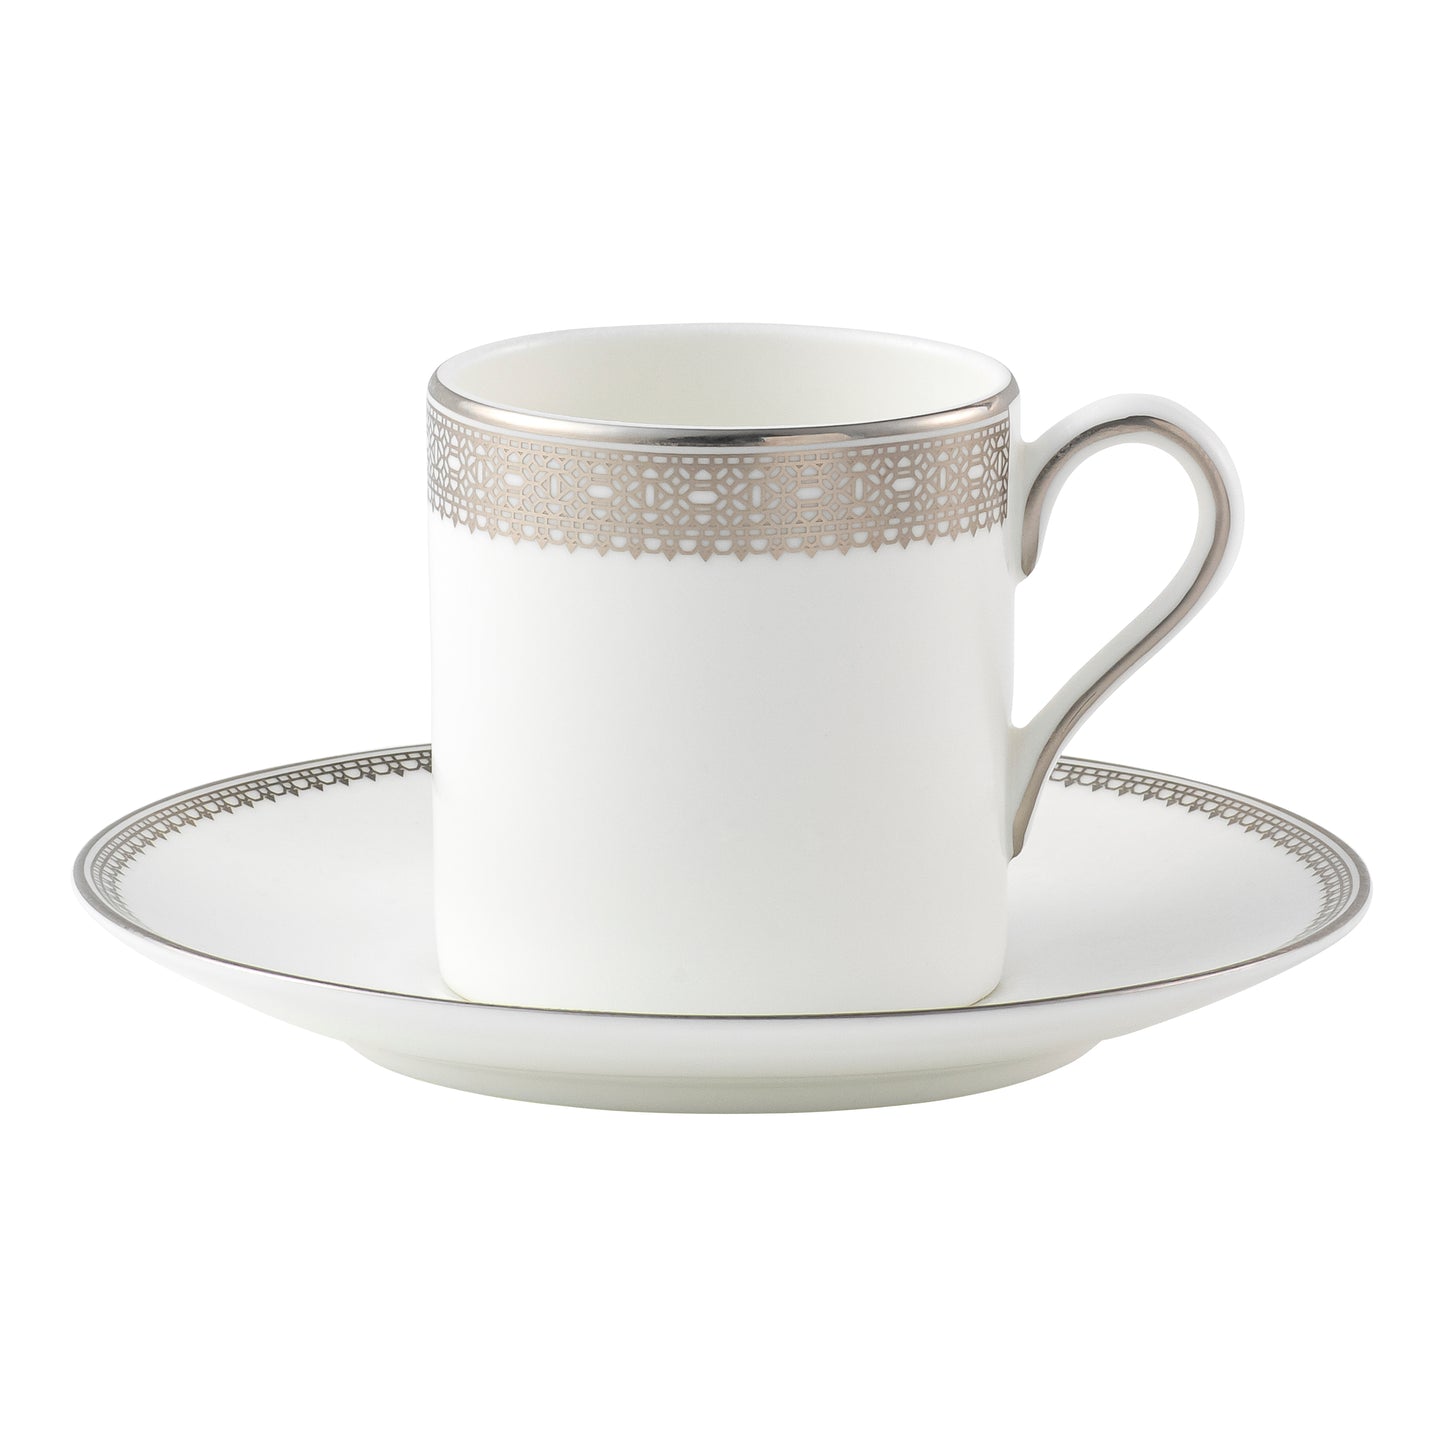 Wedgwood Vera Wang Lace Platinum Coffee Cup & Saucer